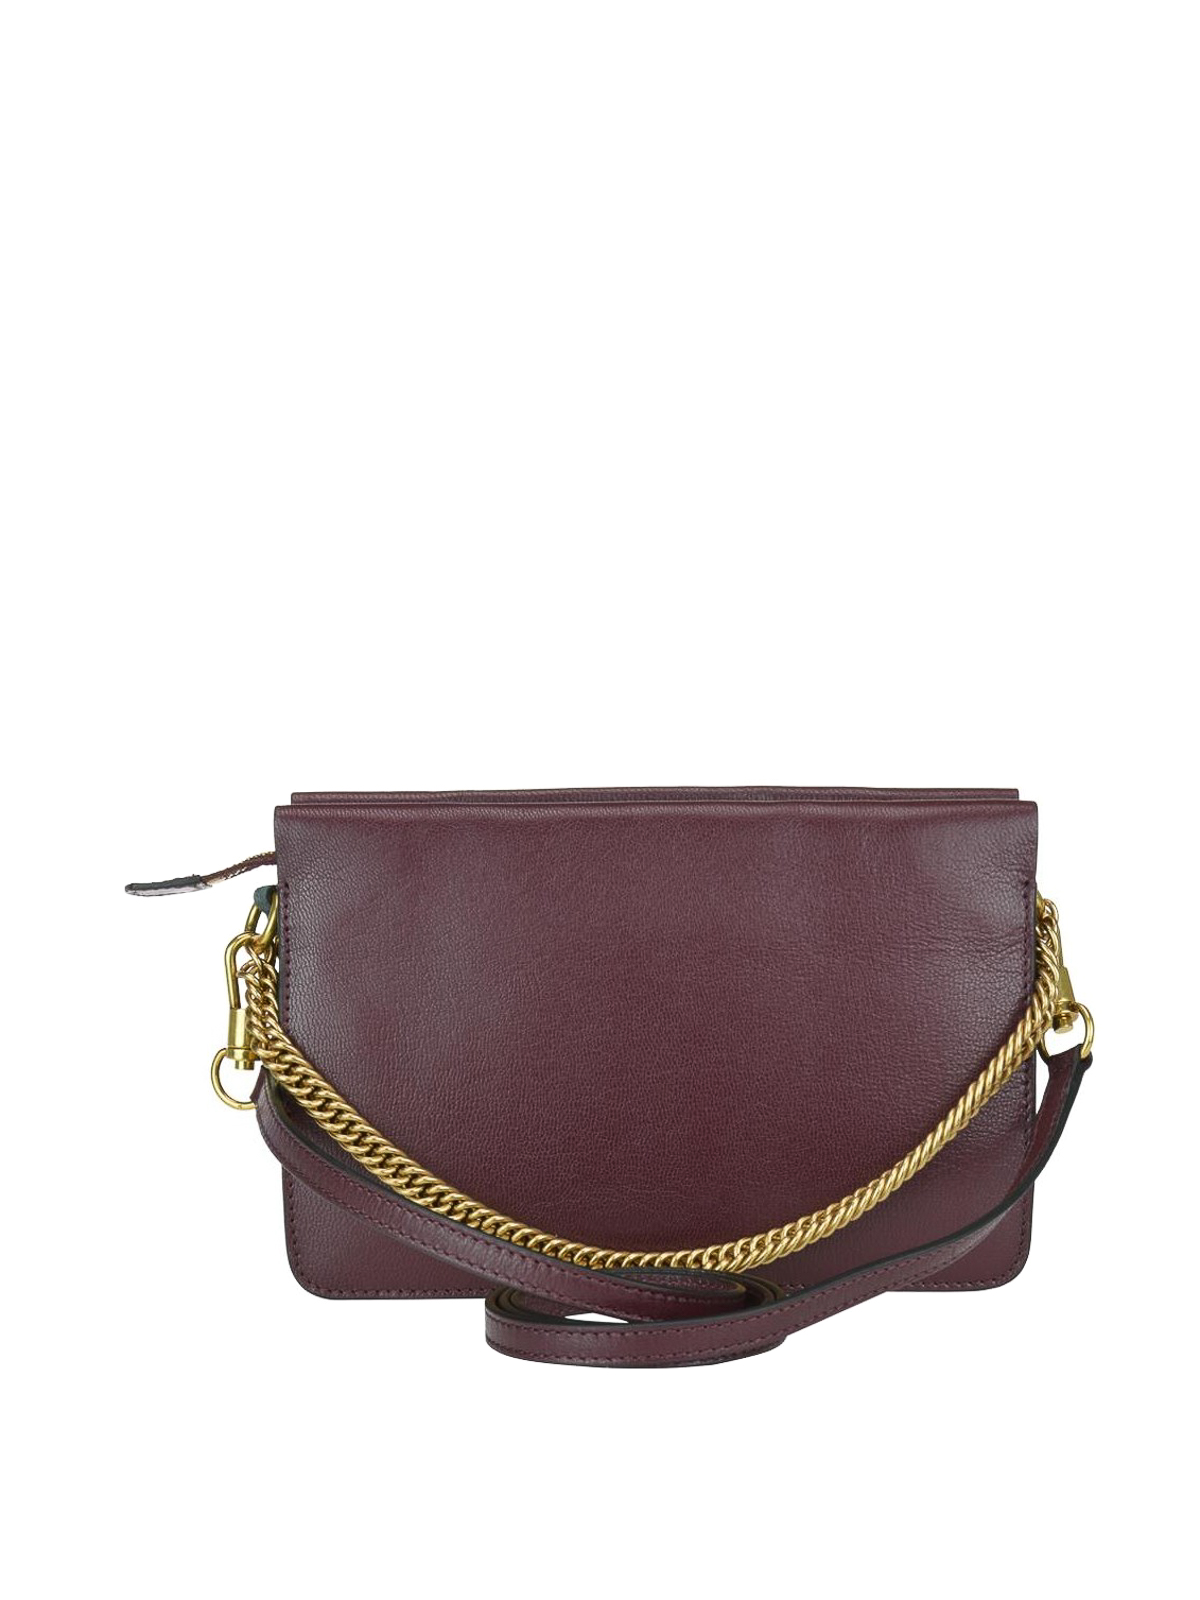 Cross body bags Givenchy - Cross 3 burgundy leather small bag ...